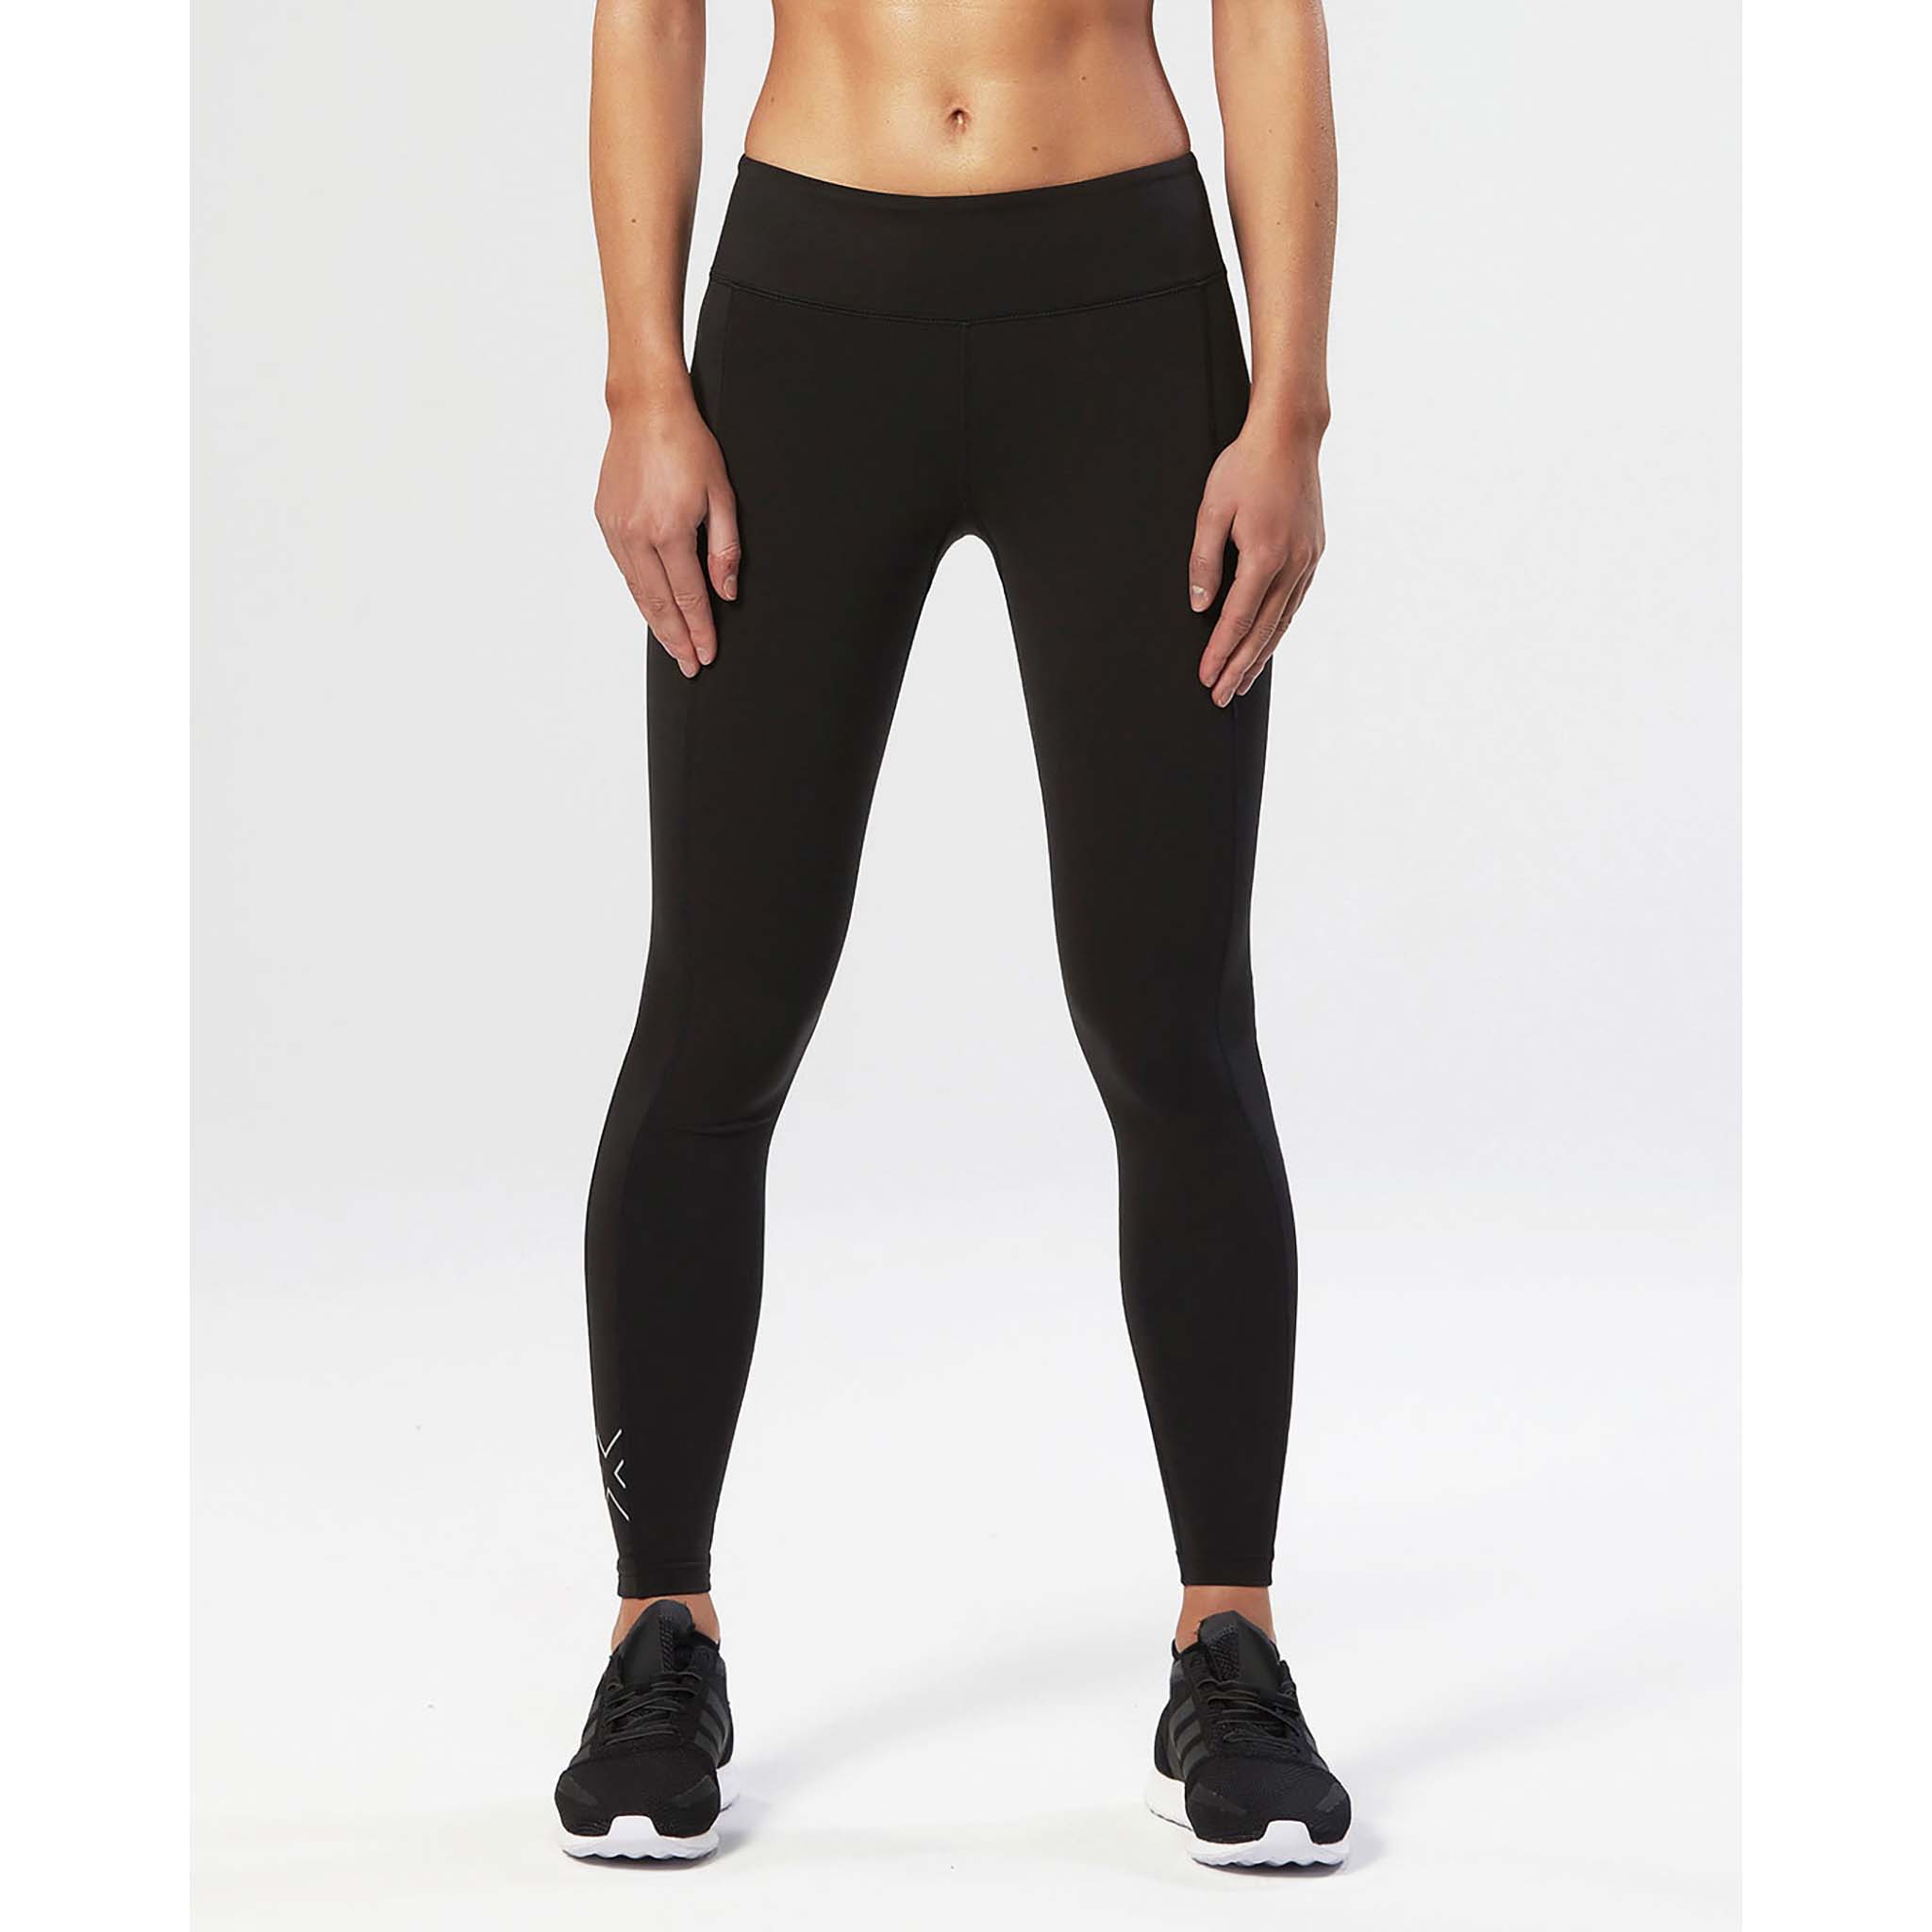 2XU mid-rise compression tights for women – Soccer Sport Fitness